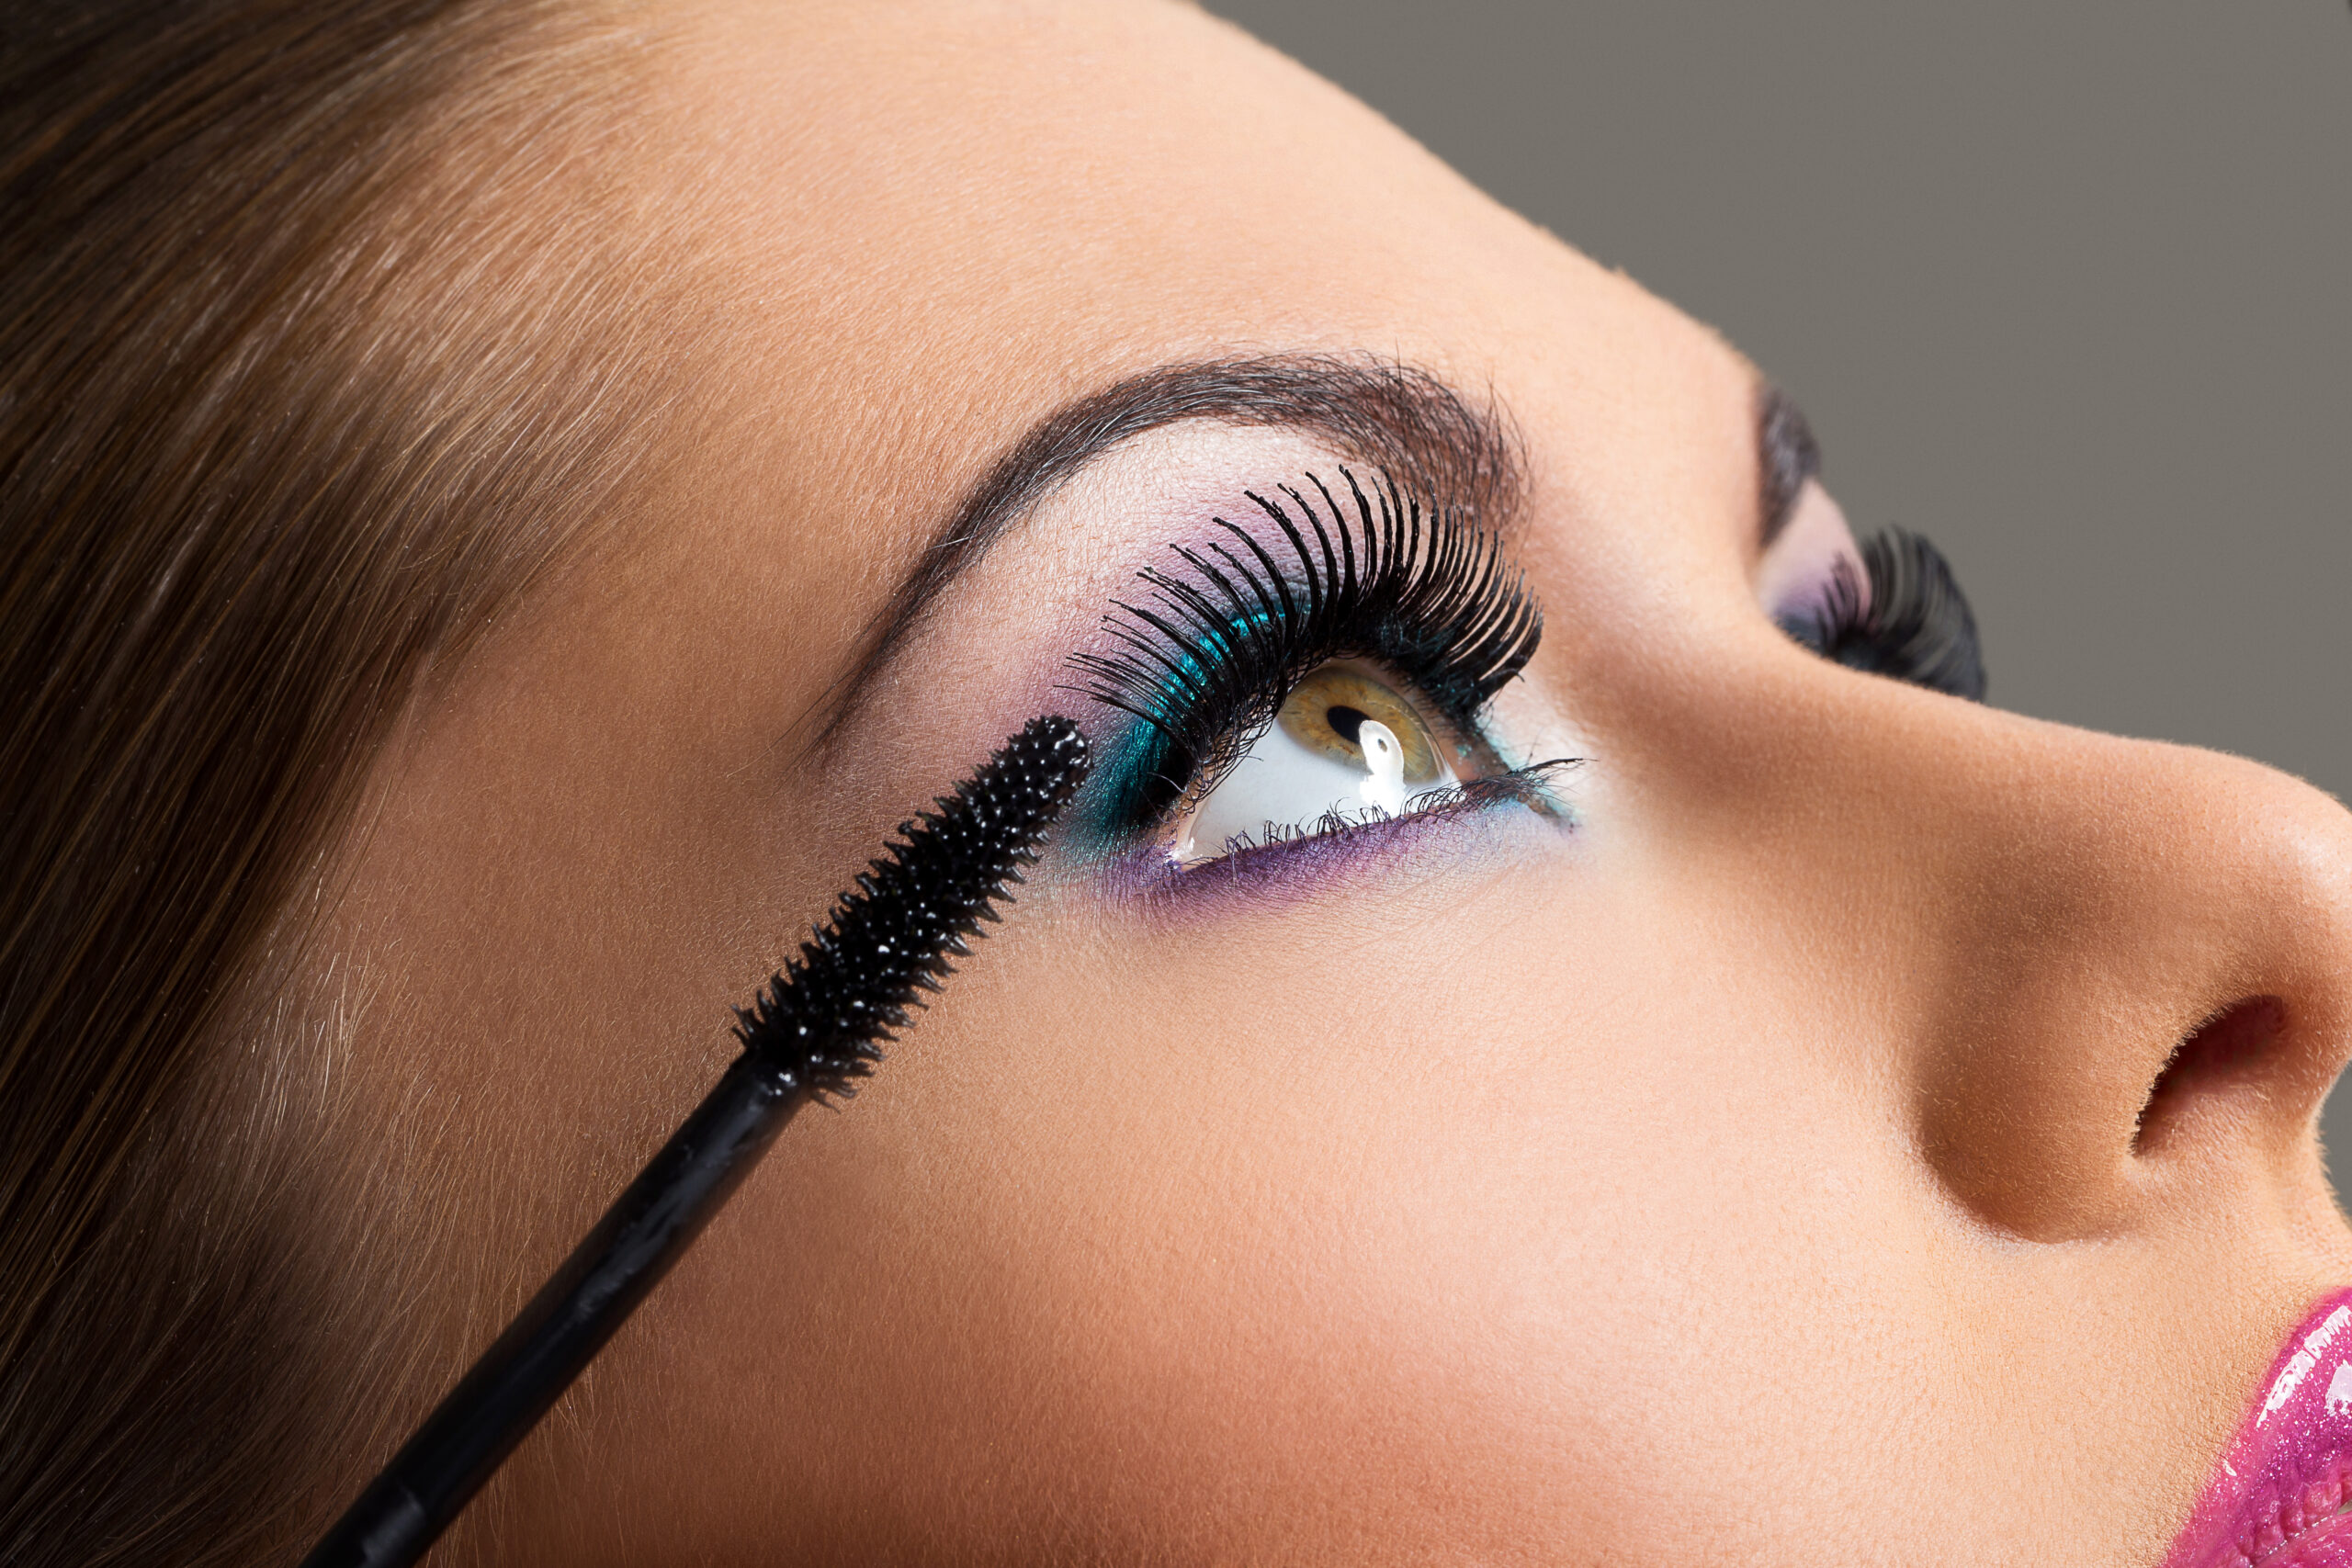 Best Hypoallergenic Eye Makeup Products for Sensitive Eyes